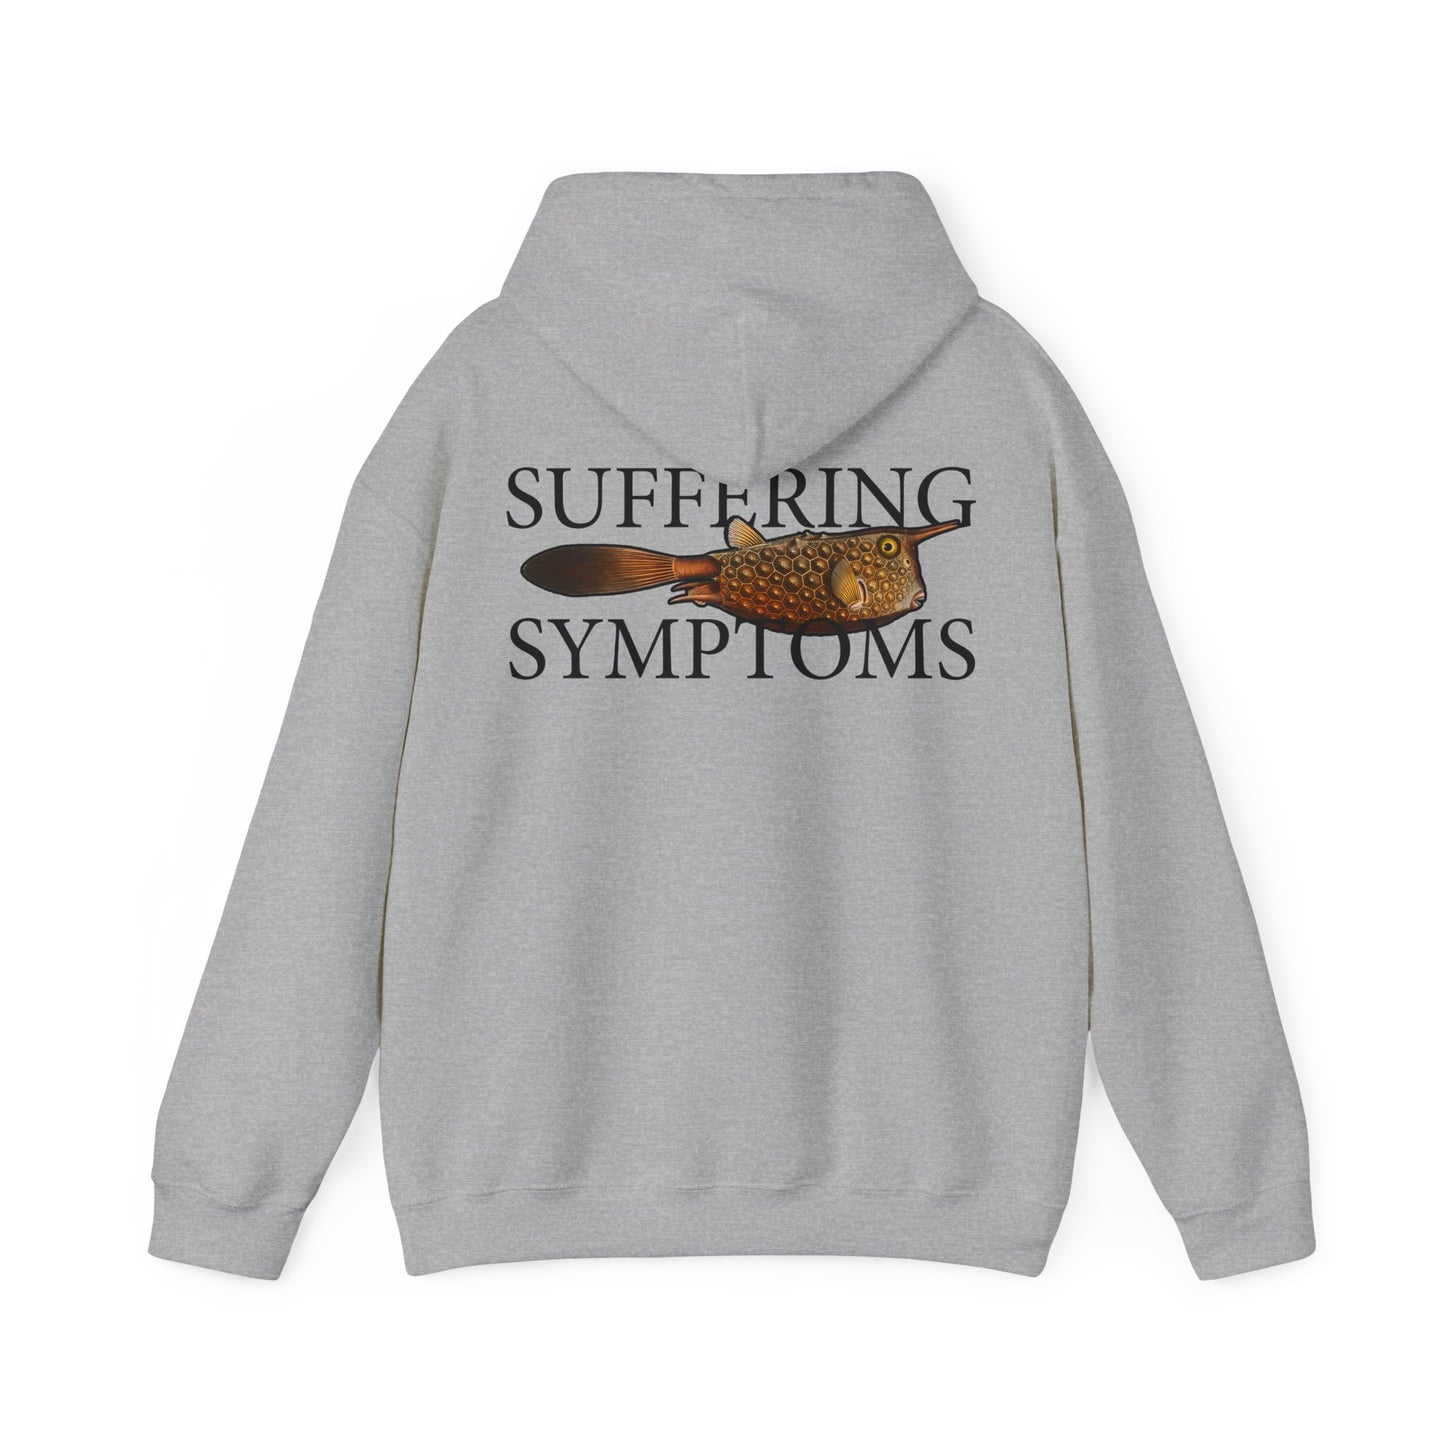 Suffering Symptoms - Hooded Edition